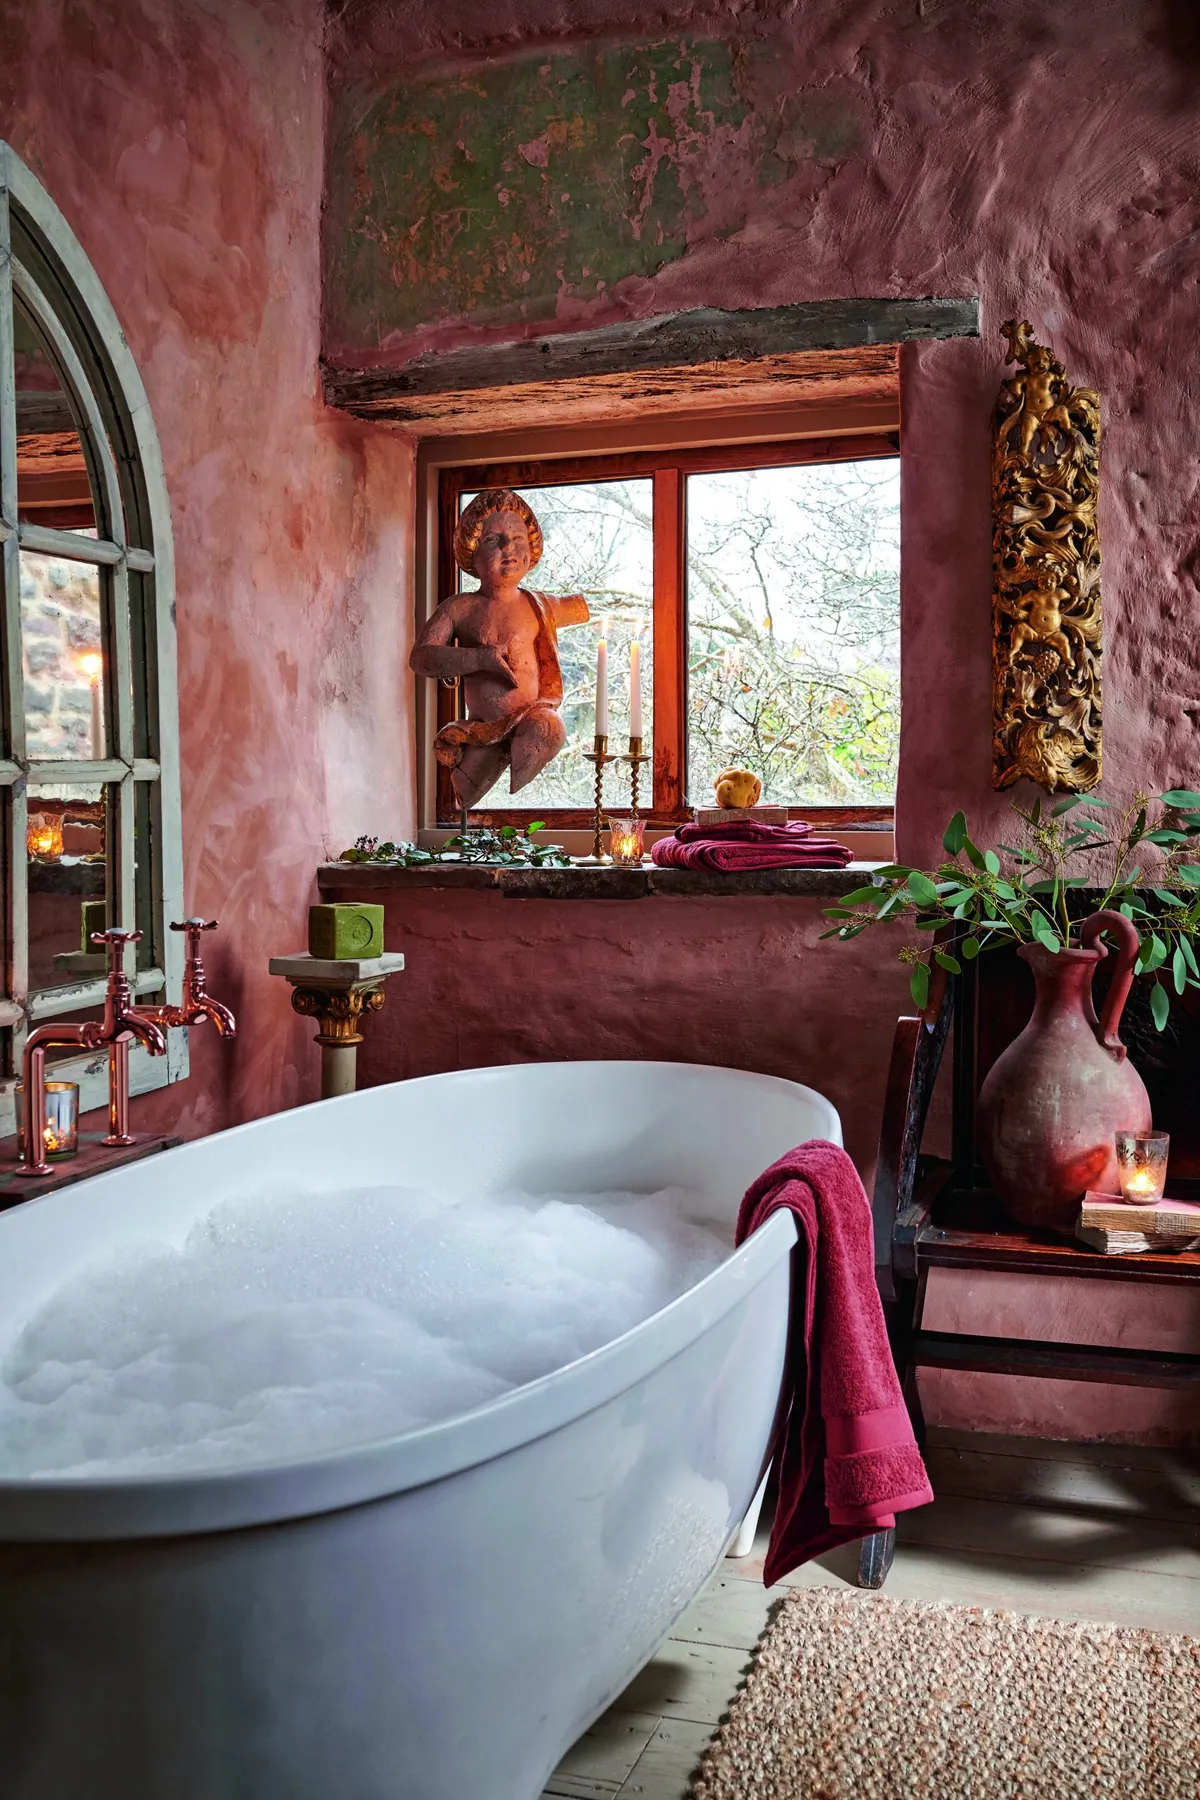 An indulgent bathtub surrounded by salvaged church antiques.